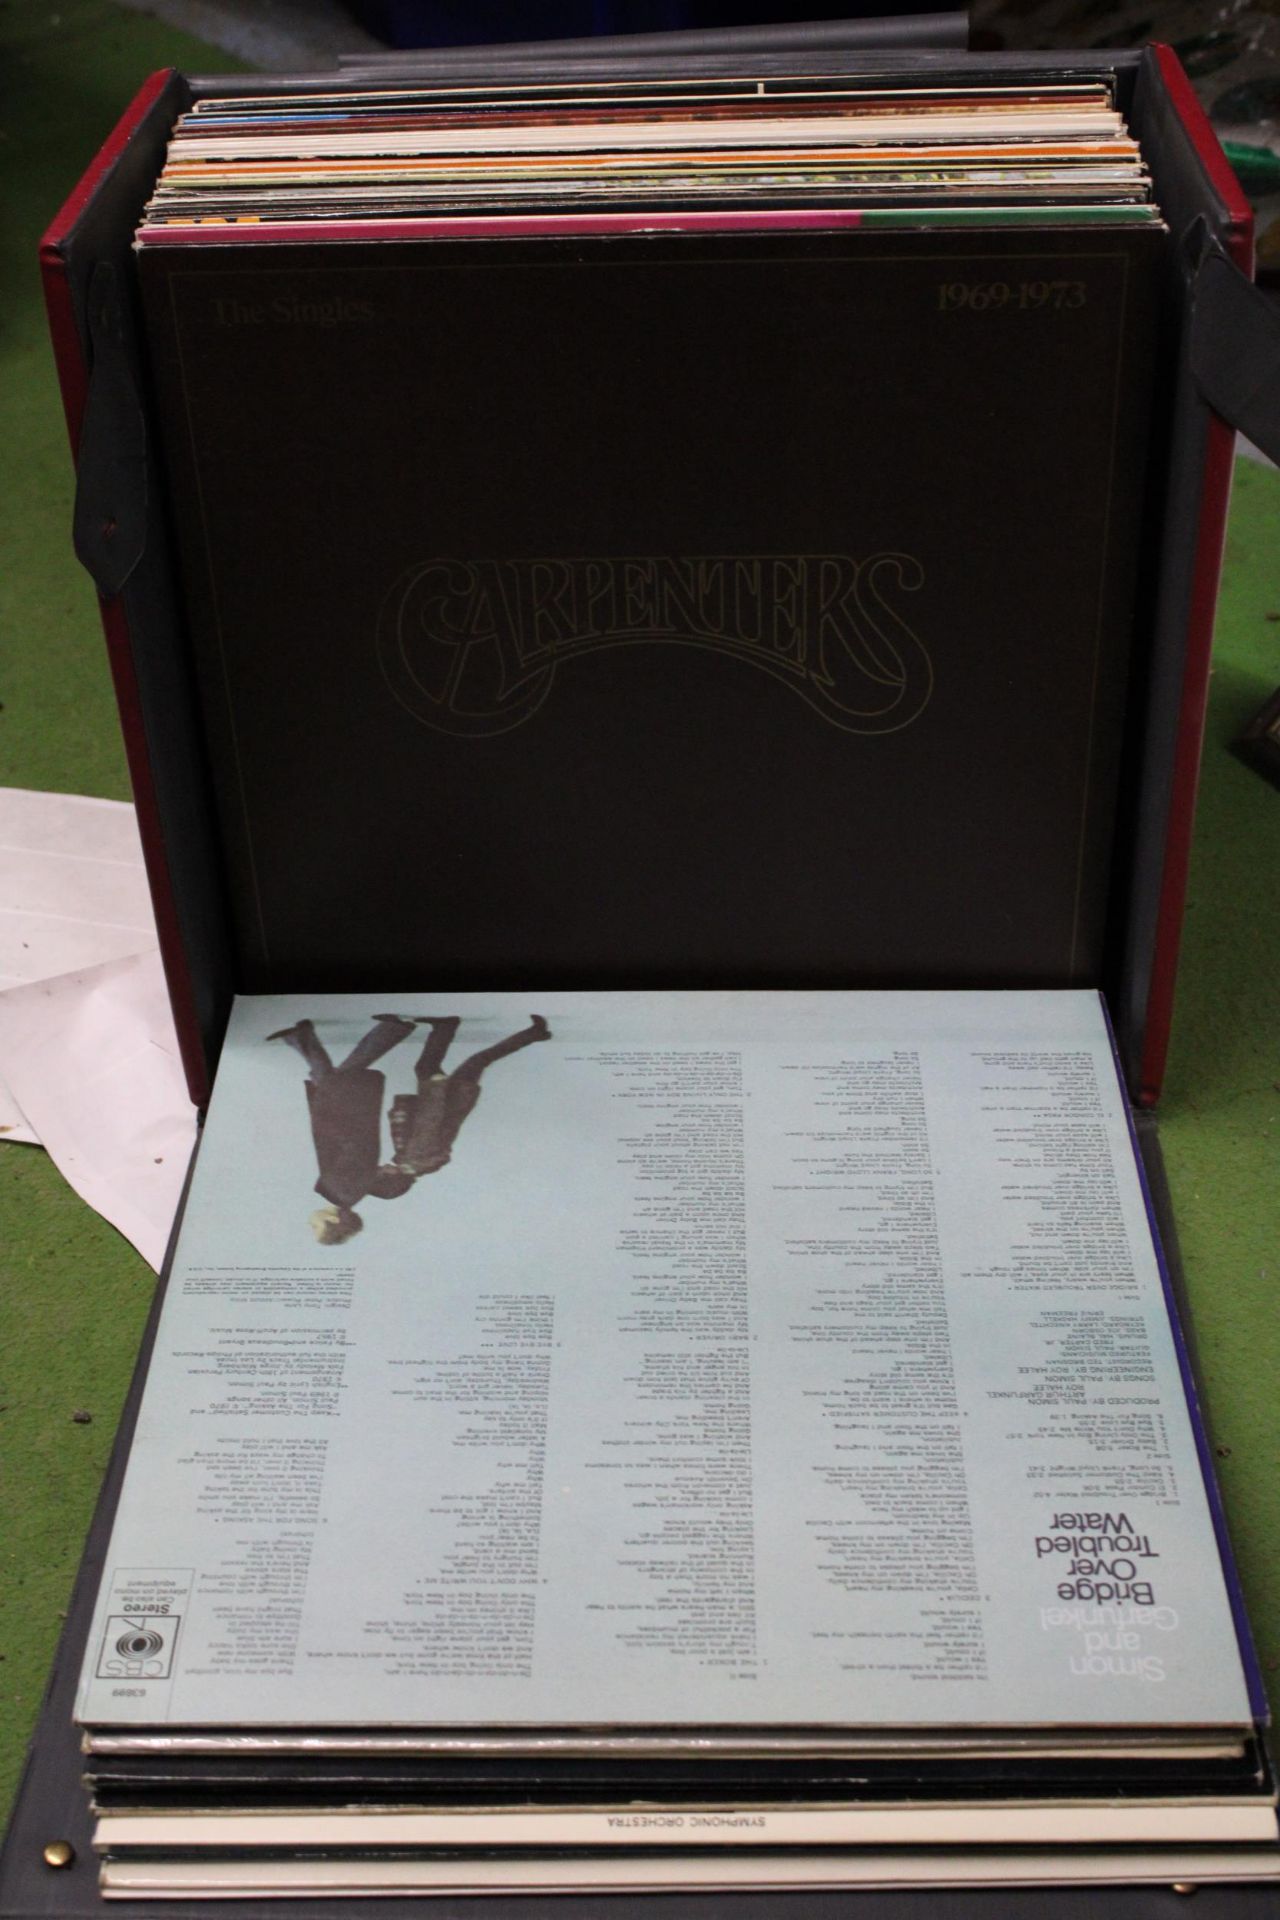 A QUANTITY OF VINYLS IN CASE TO INCLUDE SHIRLEY RASSEY, BARBRA STREISAND, ABBA AND THE SEEKERS - Image 3 of 5